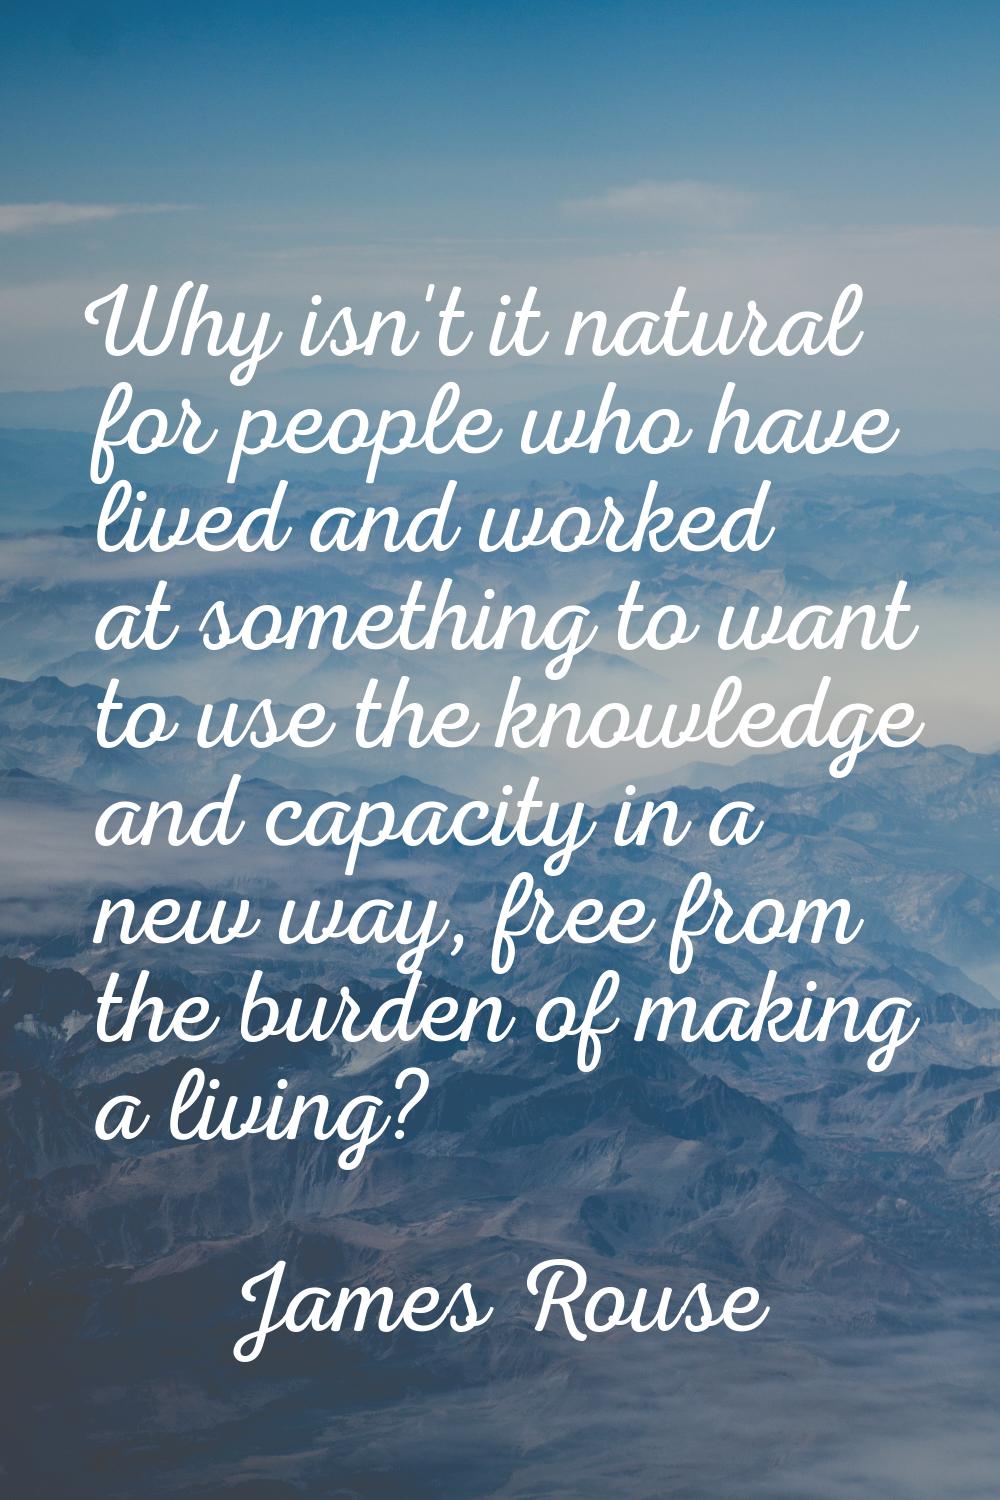 Why isn't it natural for people who have lived and worked at something to want to use the knowledge